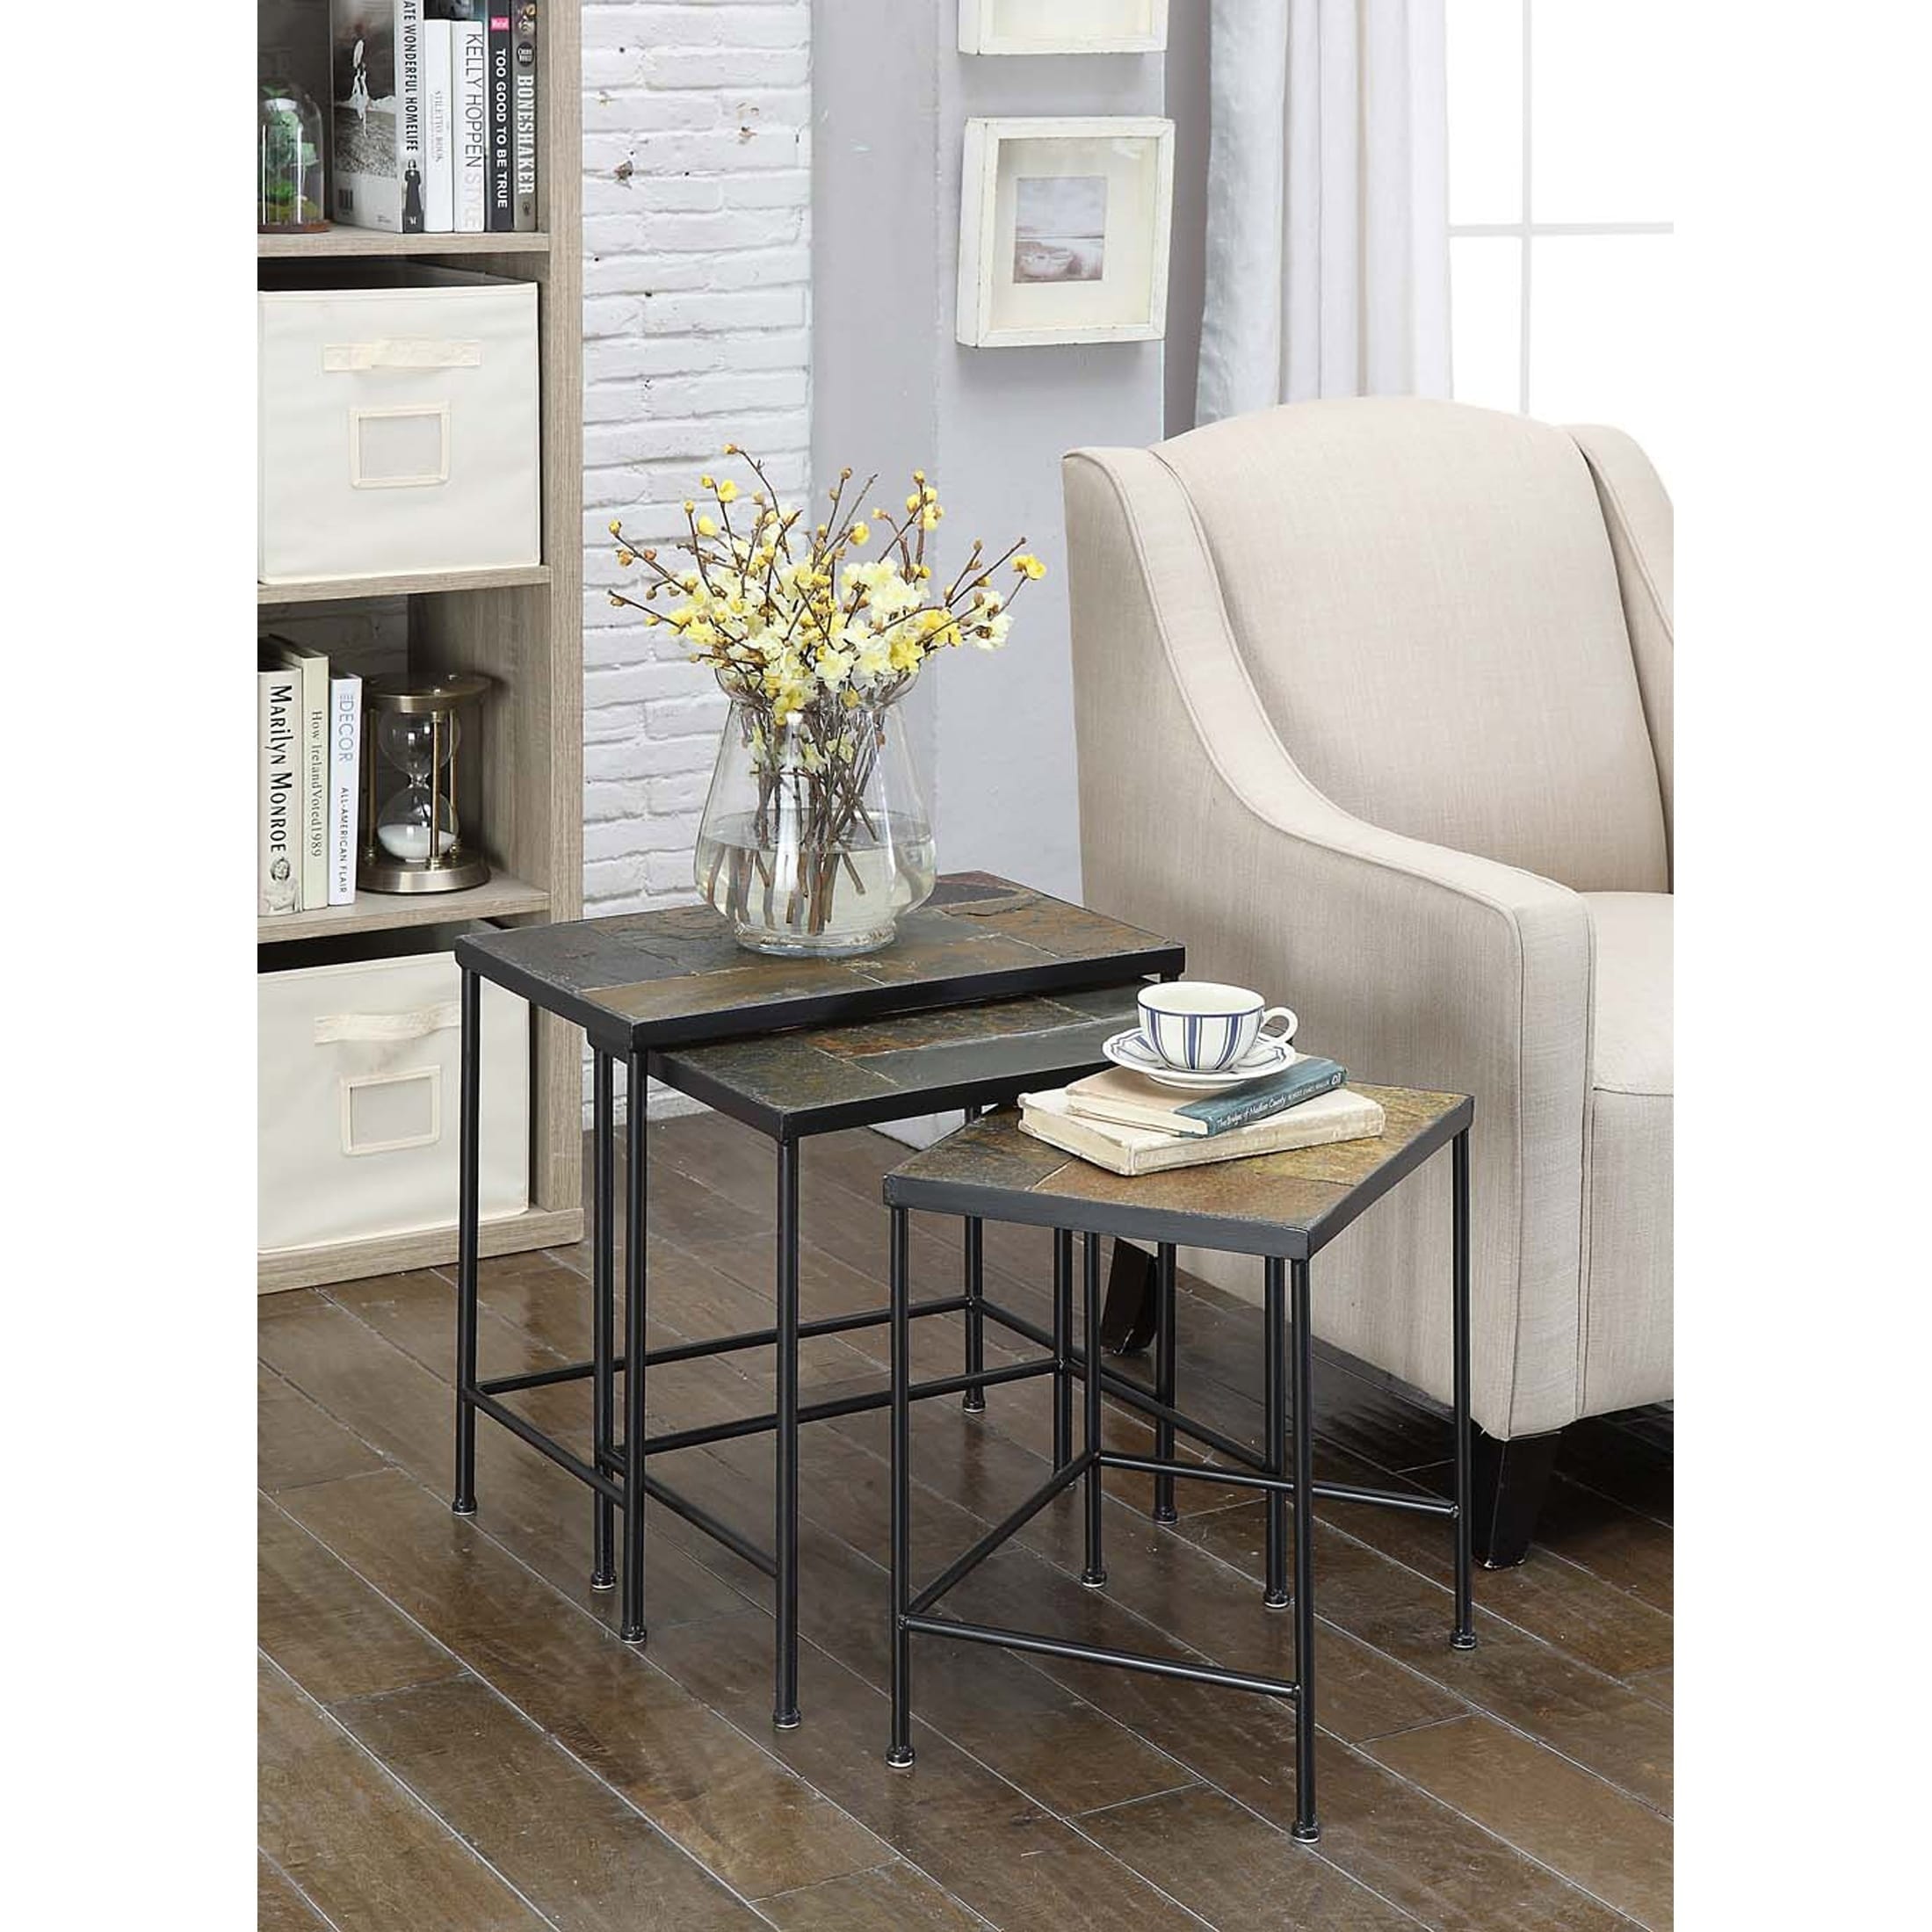 4D Concepts 3 Piece Nesting Table with Slate Top